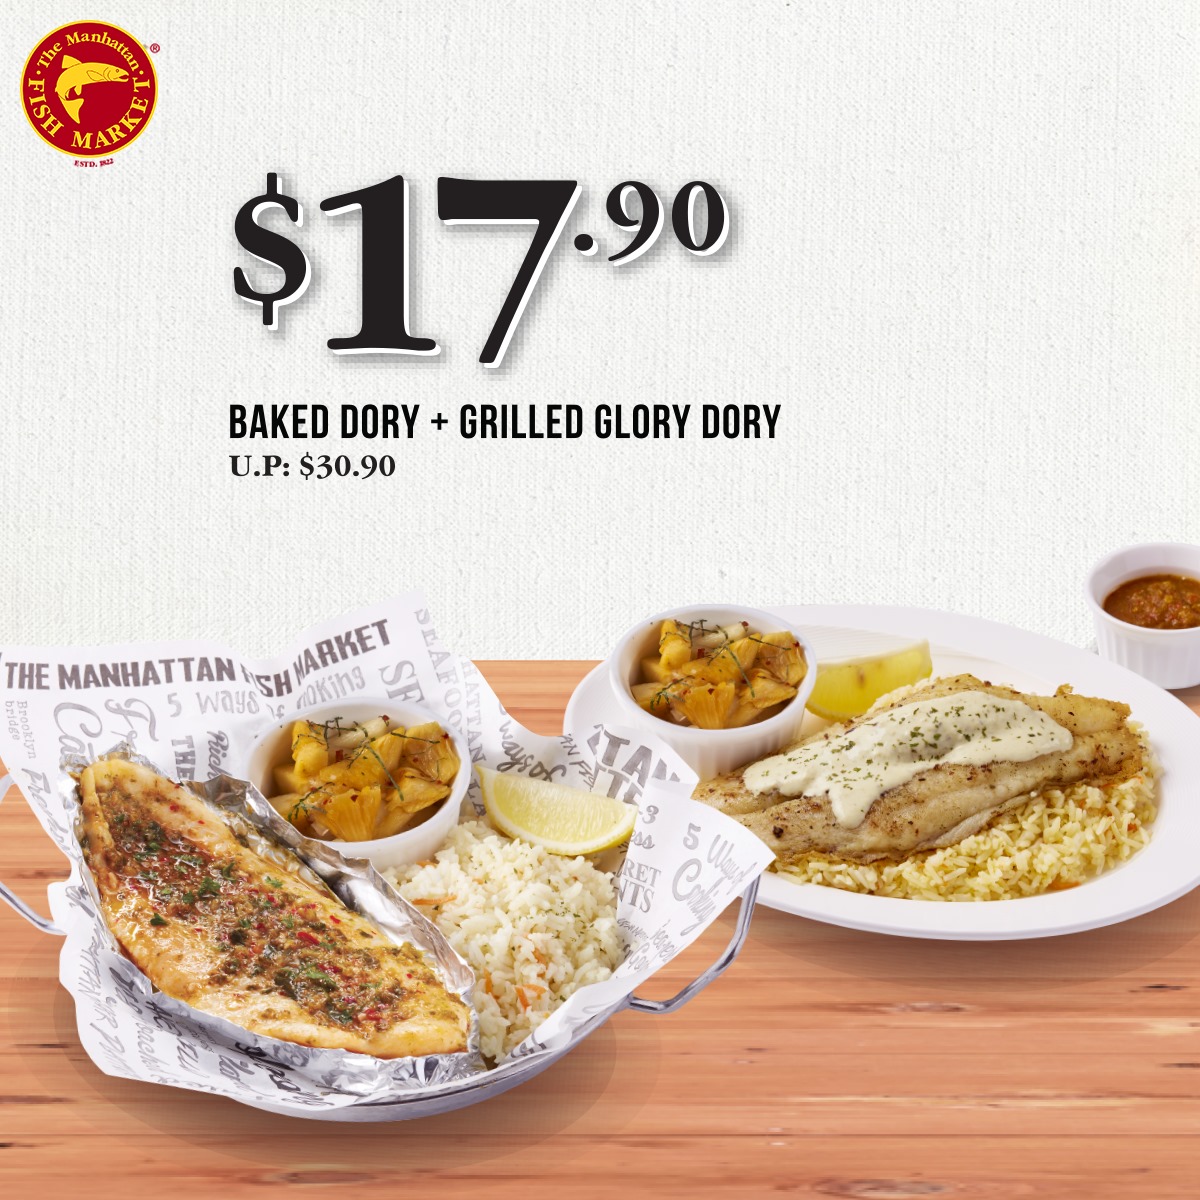 Flash these coupons from The Manhattan FISH MARKET on your mobile devices to enjoy great savings - 5